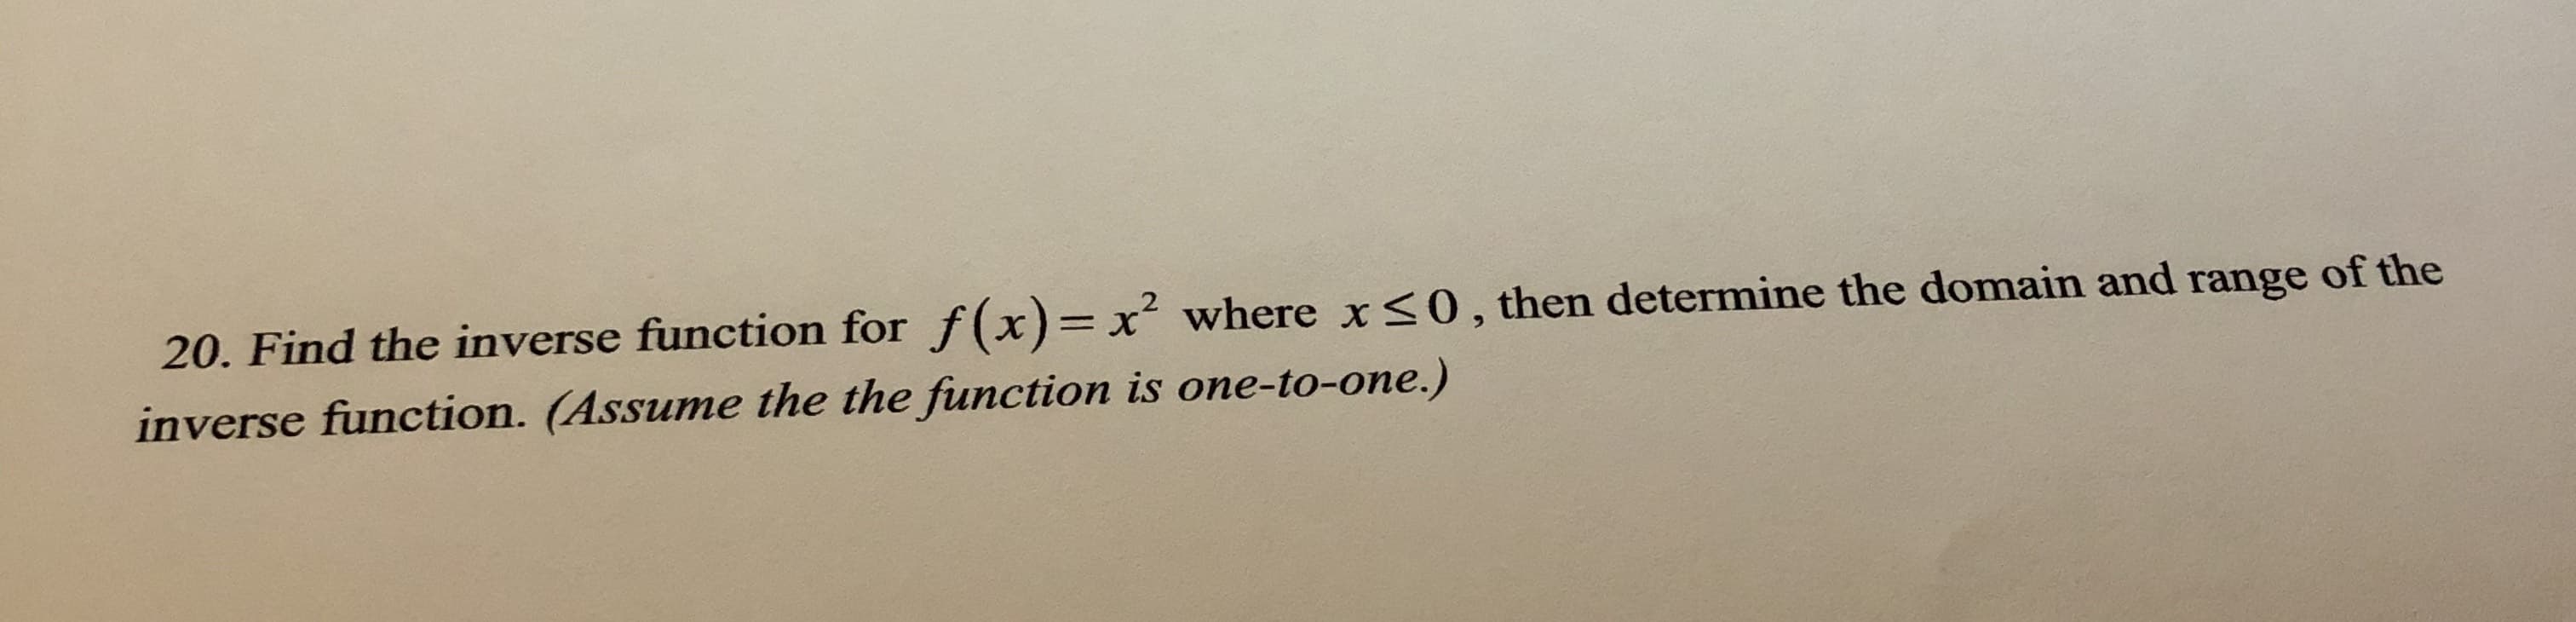 20. Find the inverse function for f(x)= x² where x<0, then determine the domain and range of the
inverse function. (Assume the the function is one-to-one.)
